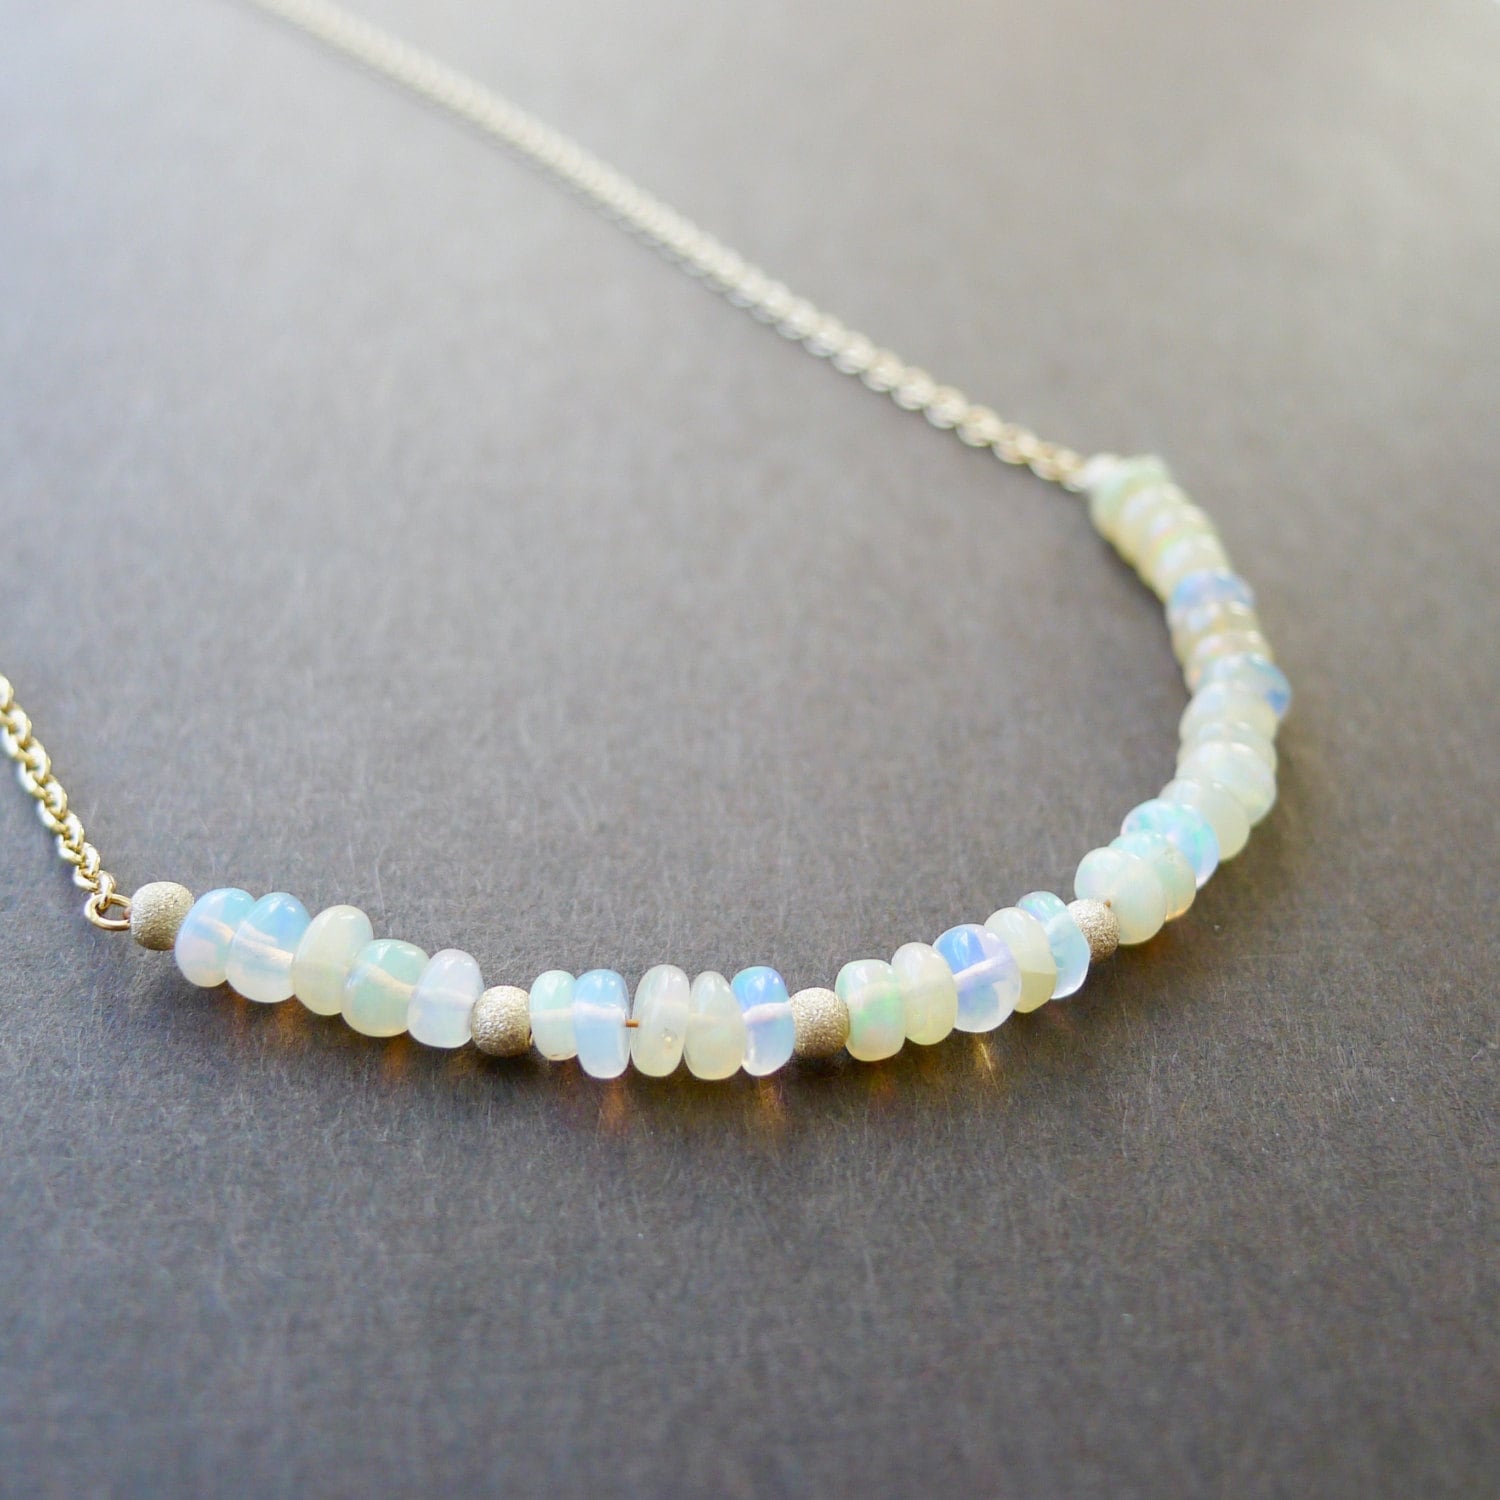 Opal Necklace, Gold Opal Necklace, Ethiopian Opals, Gold Necklace, Modern Opal Necklace, Opal Jewelry, Modern Jewelry, Simple Necklace